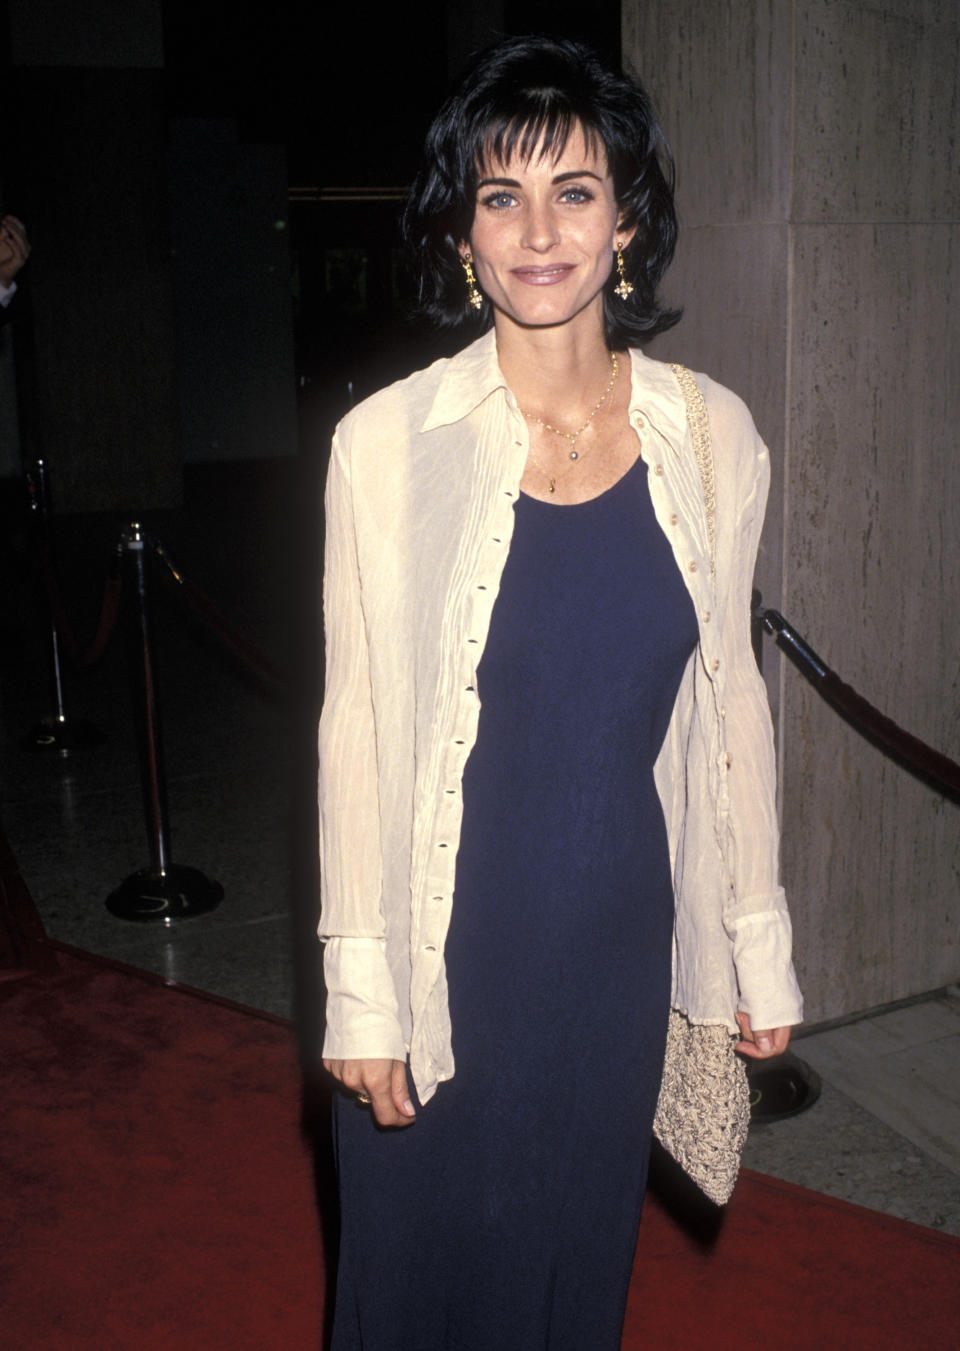 Courteney Cox on the red carpet wearing a long-sleeve shirt over a long dress, accessorized with earrings and a textured clutch